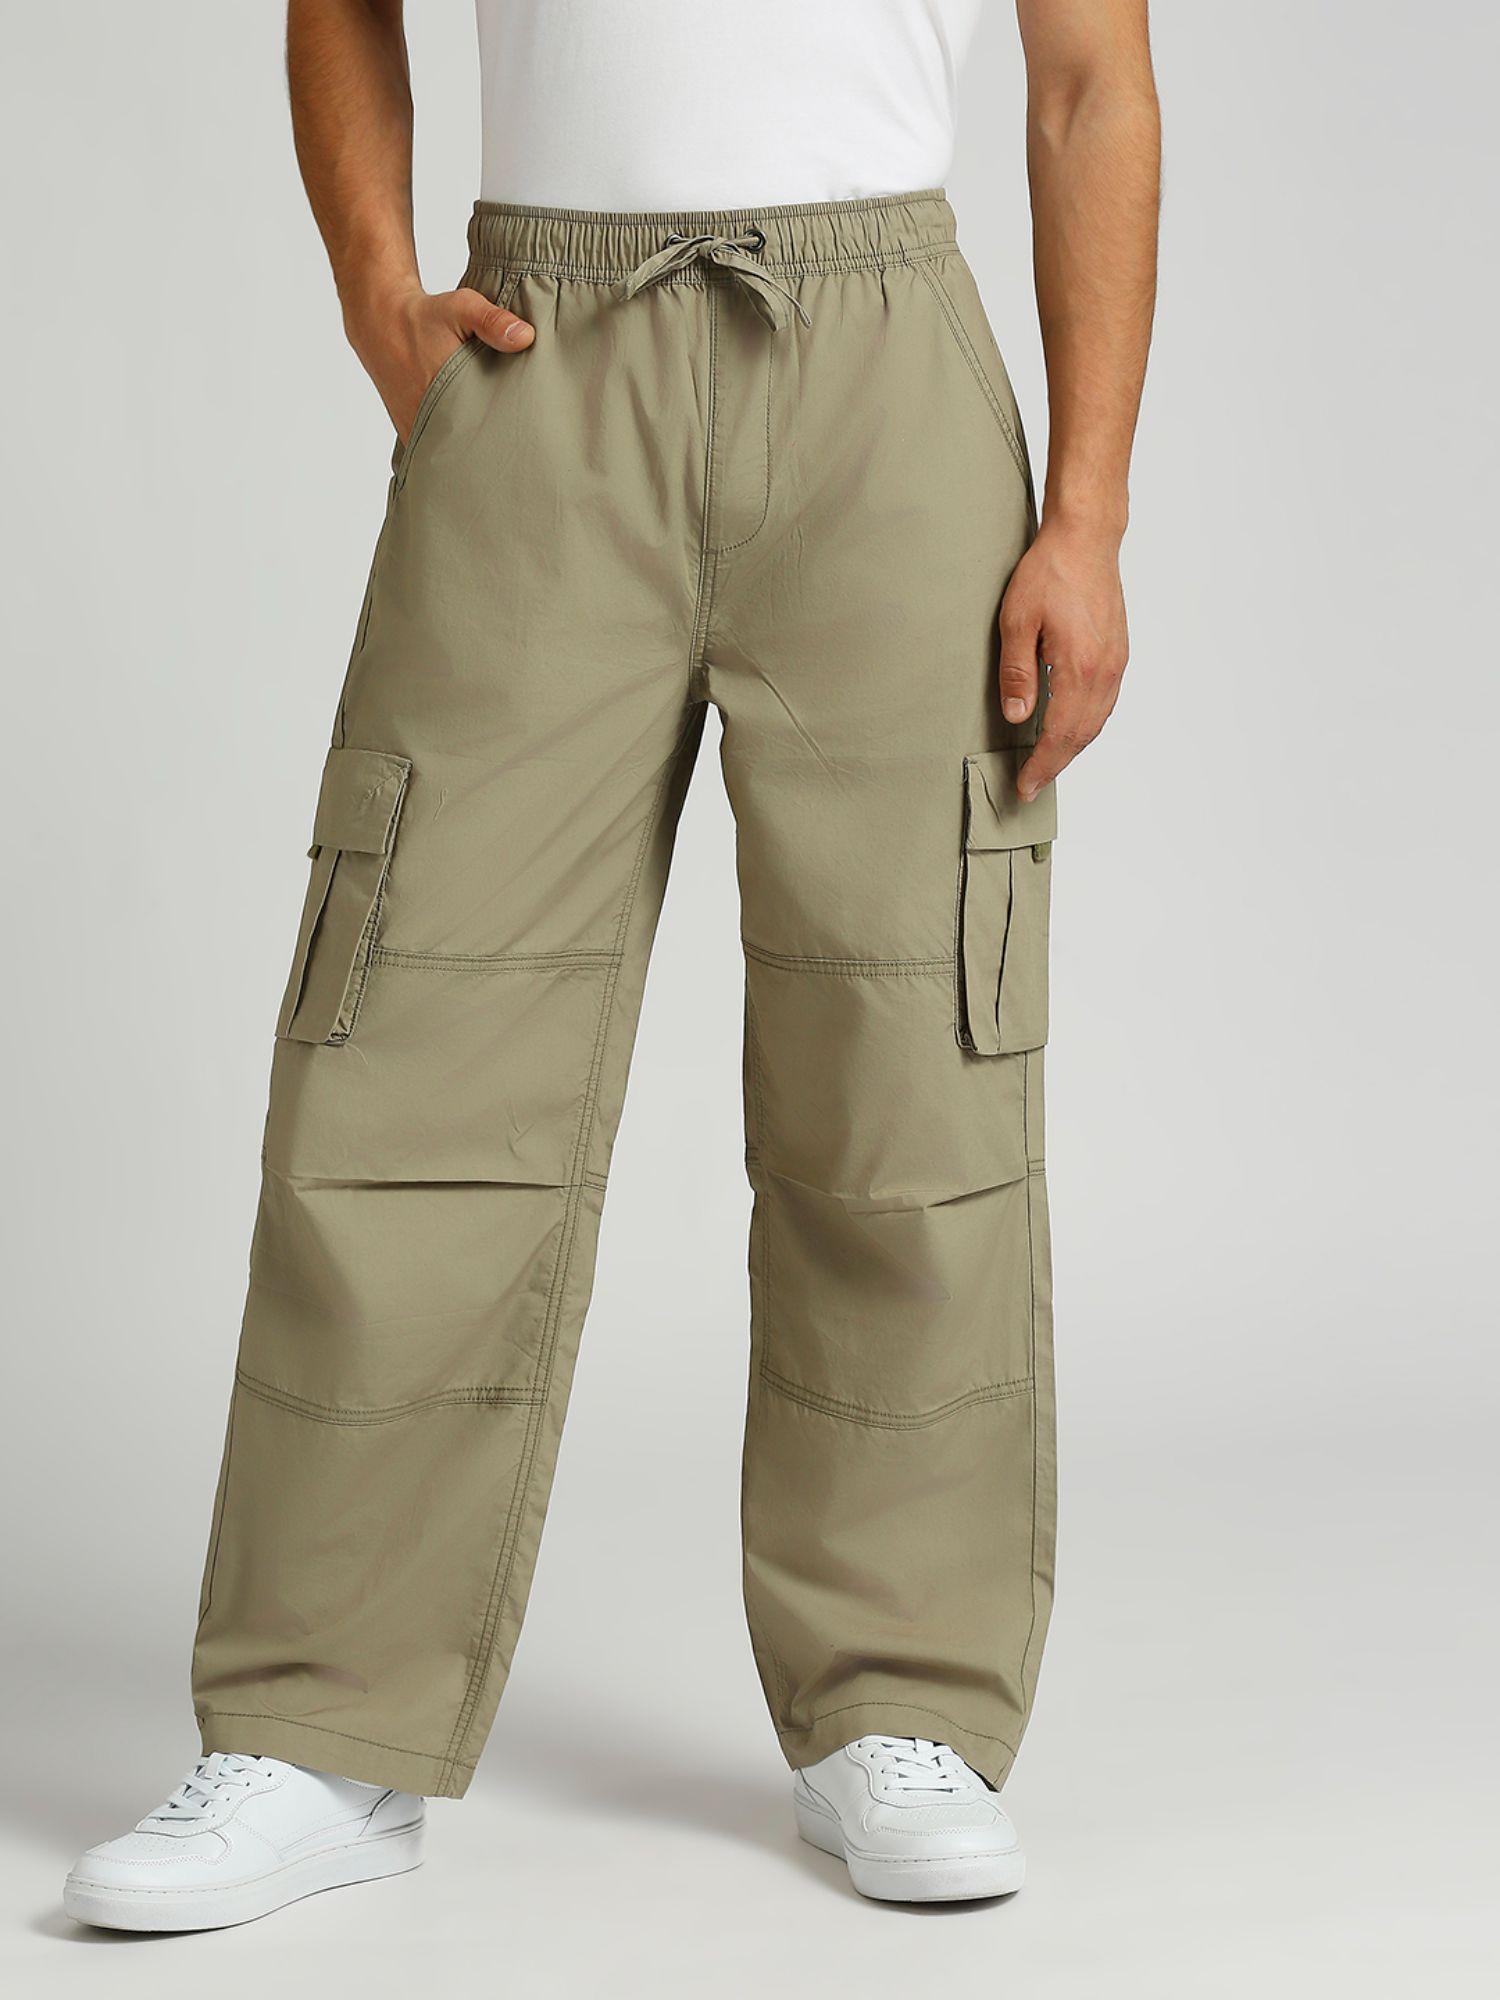 green-solid-wide-cargos